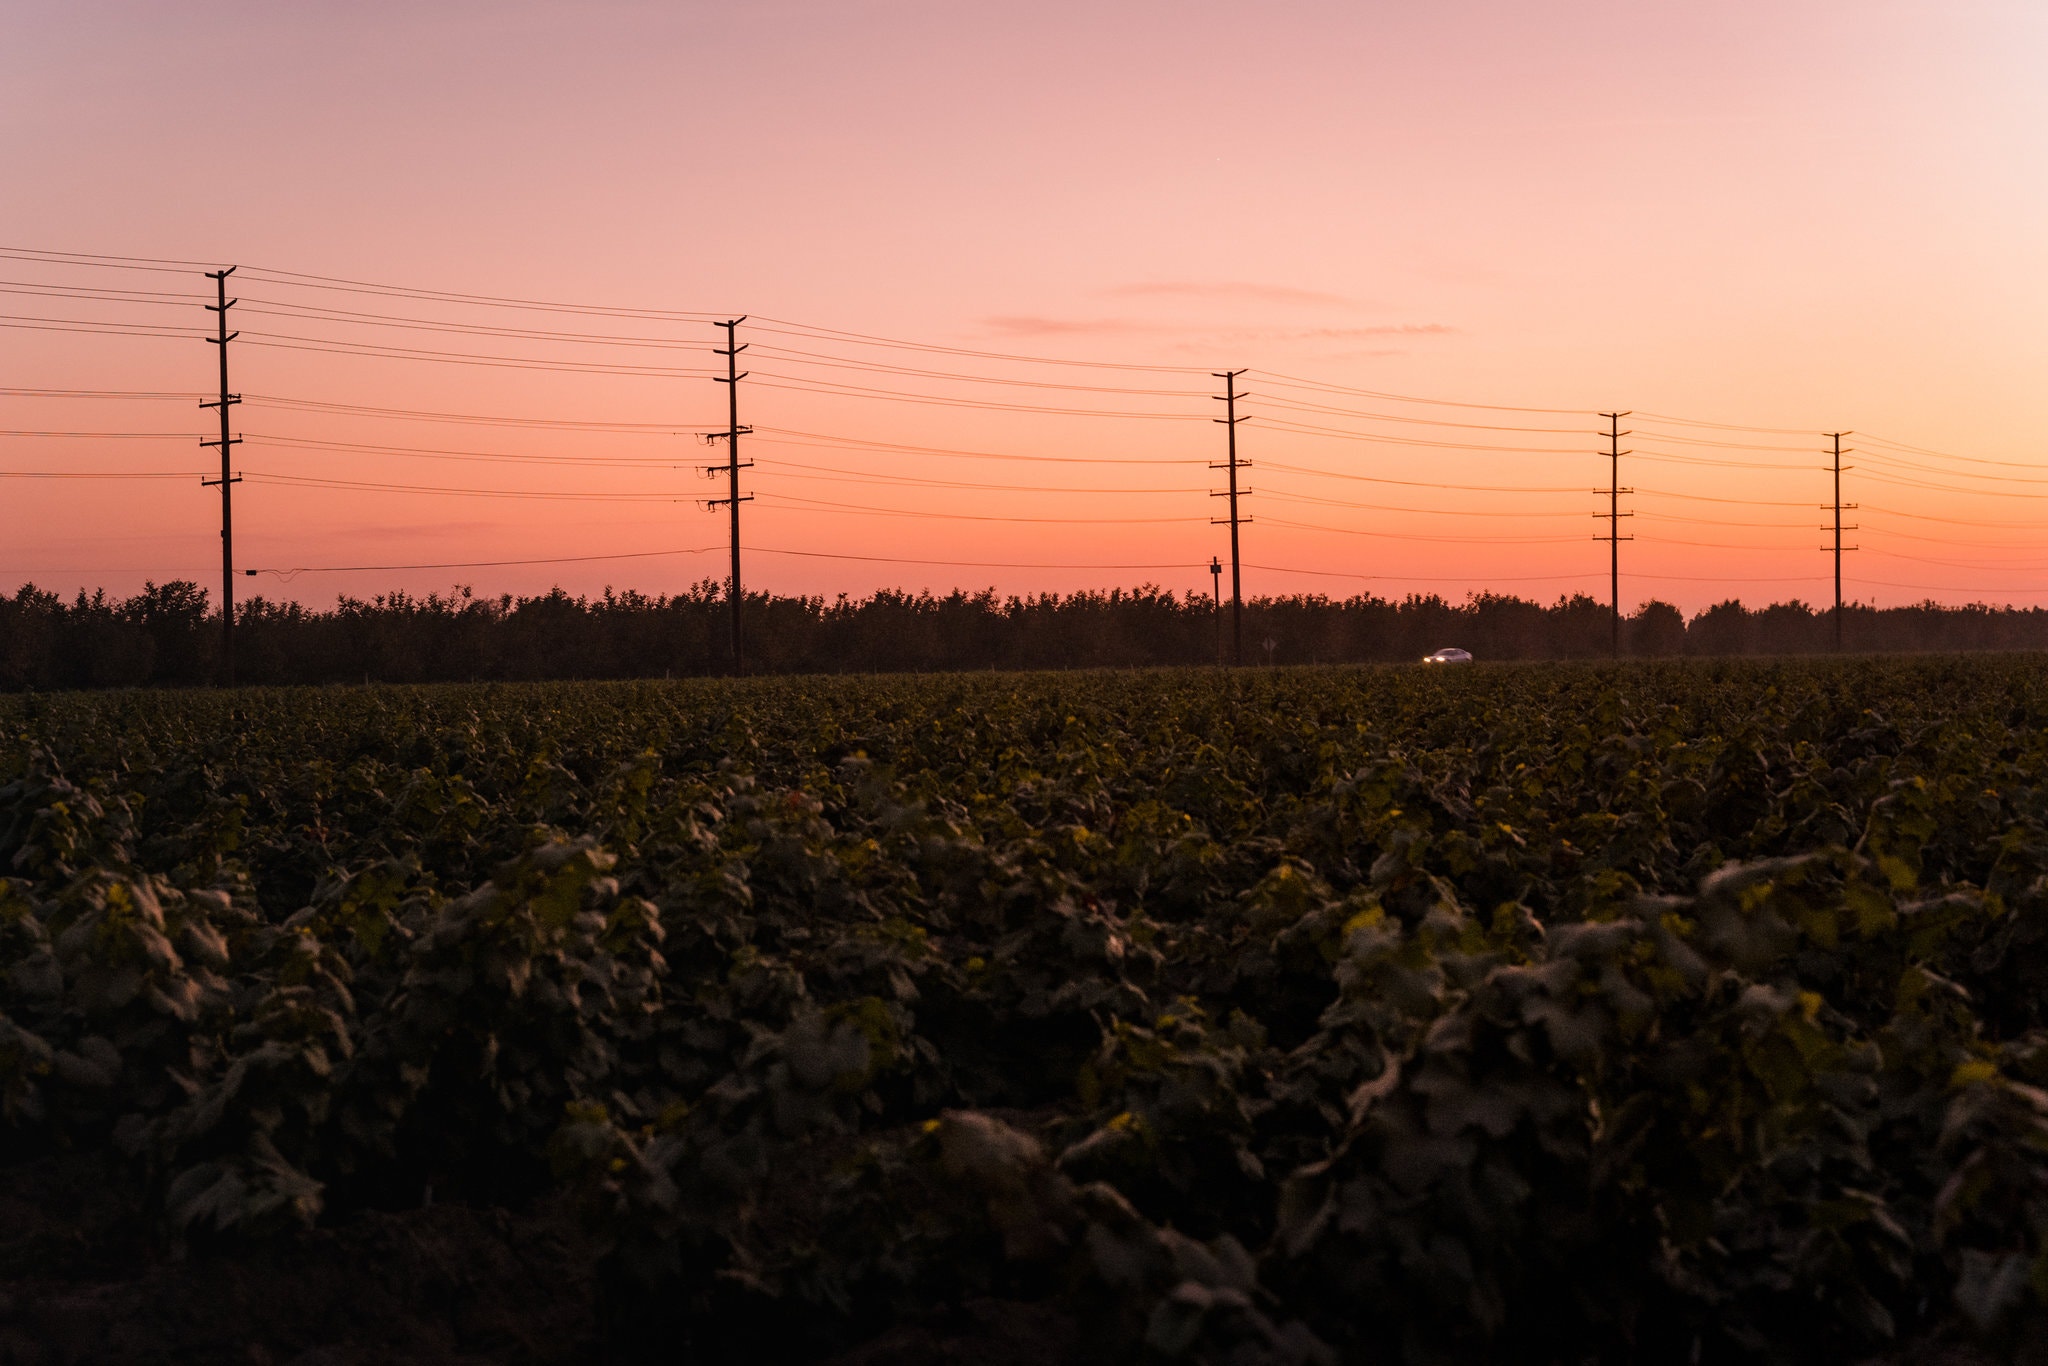 A sunset scene over a vast, green field is interrupted by a line of tall electrical power poles extending into the horizon. The sky is a blend of pink and orange, with the silhouette of trees in the distance—a moment capturing nature's beauty intersected by progress, perfect for any Berkeley Journalism feature.
